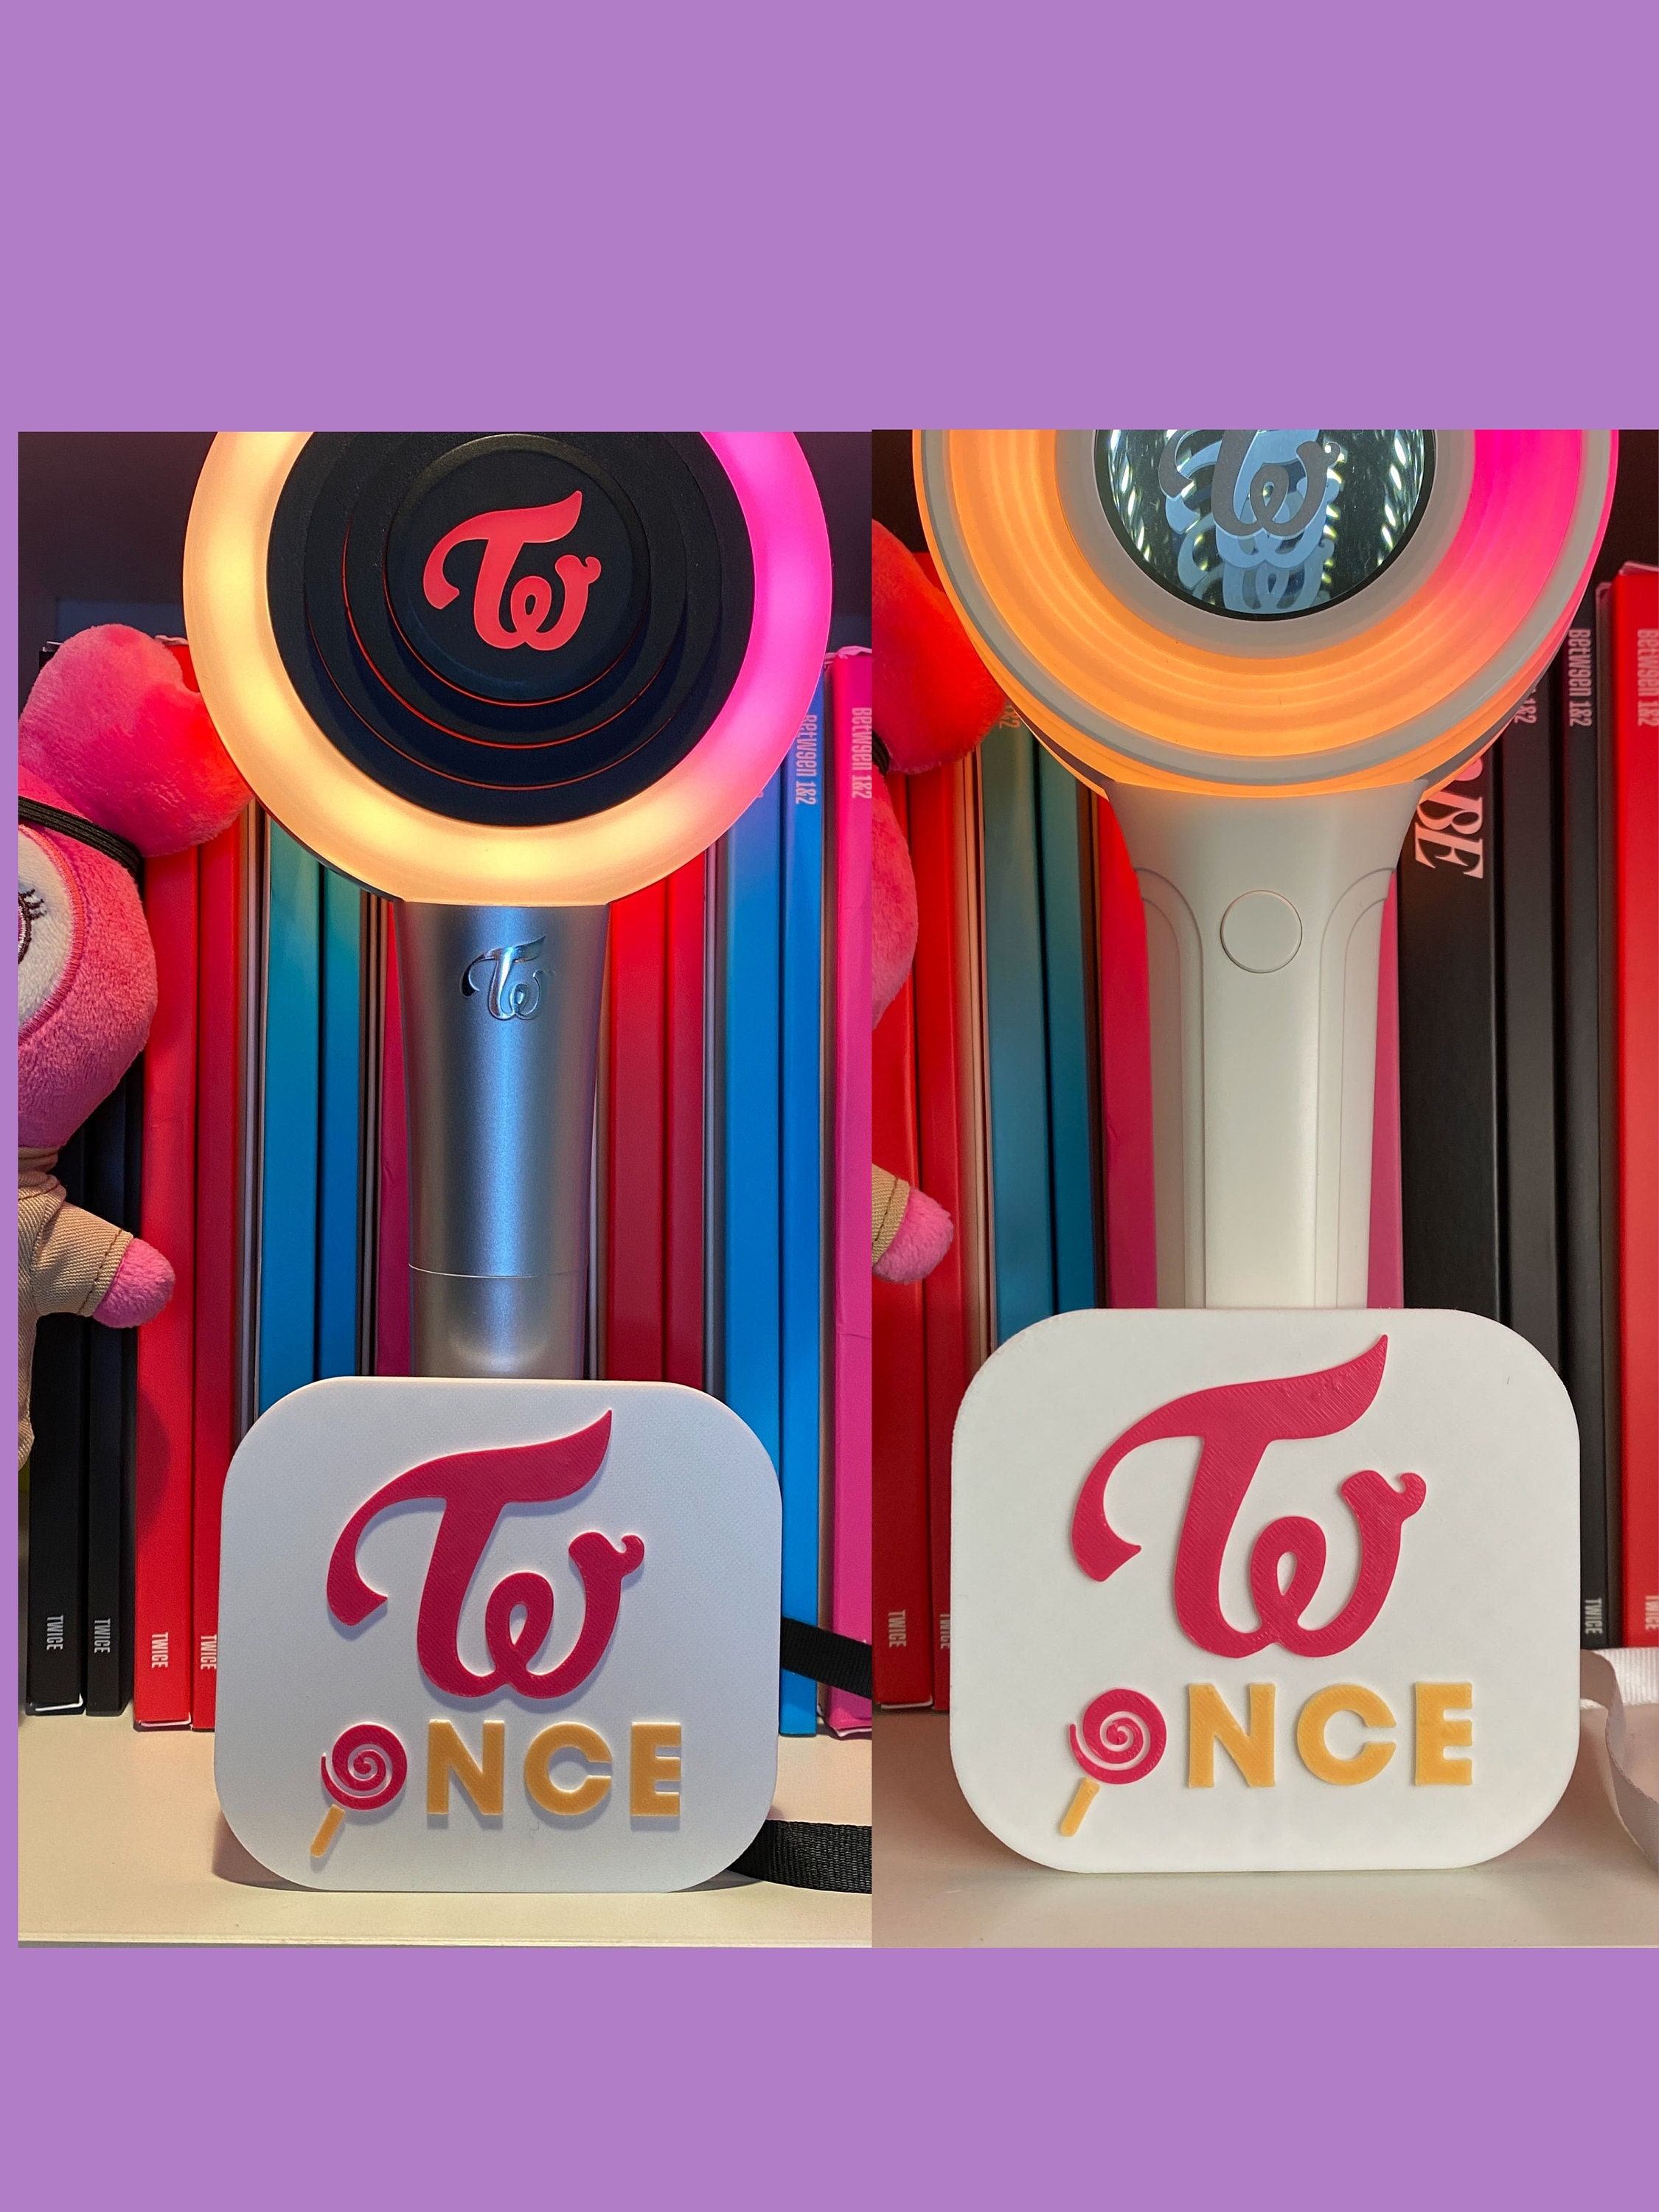 Candybong Display Stands : r/twice